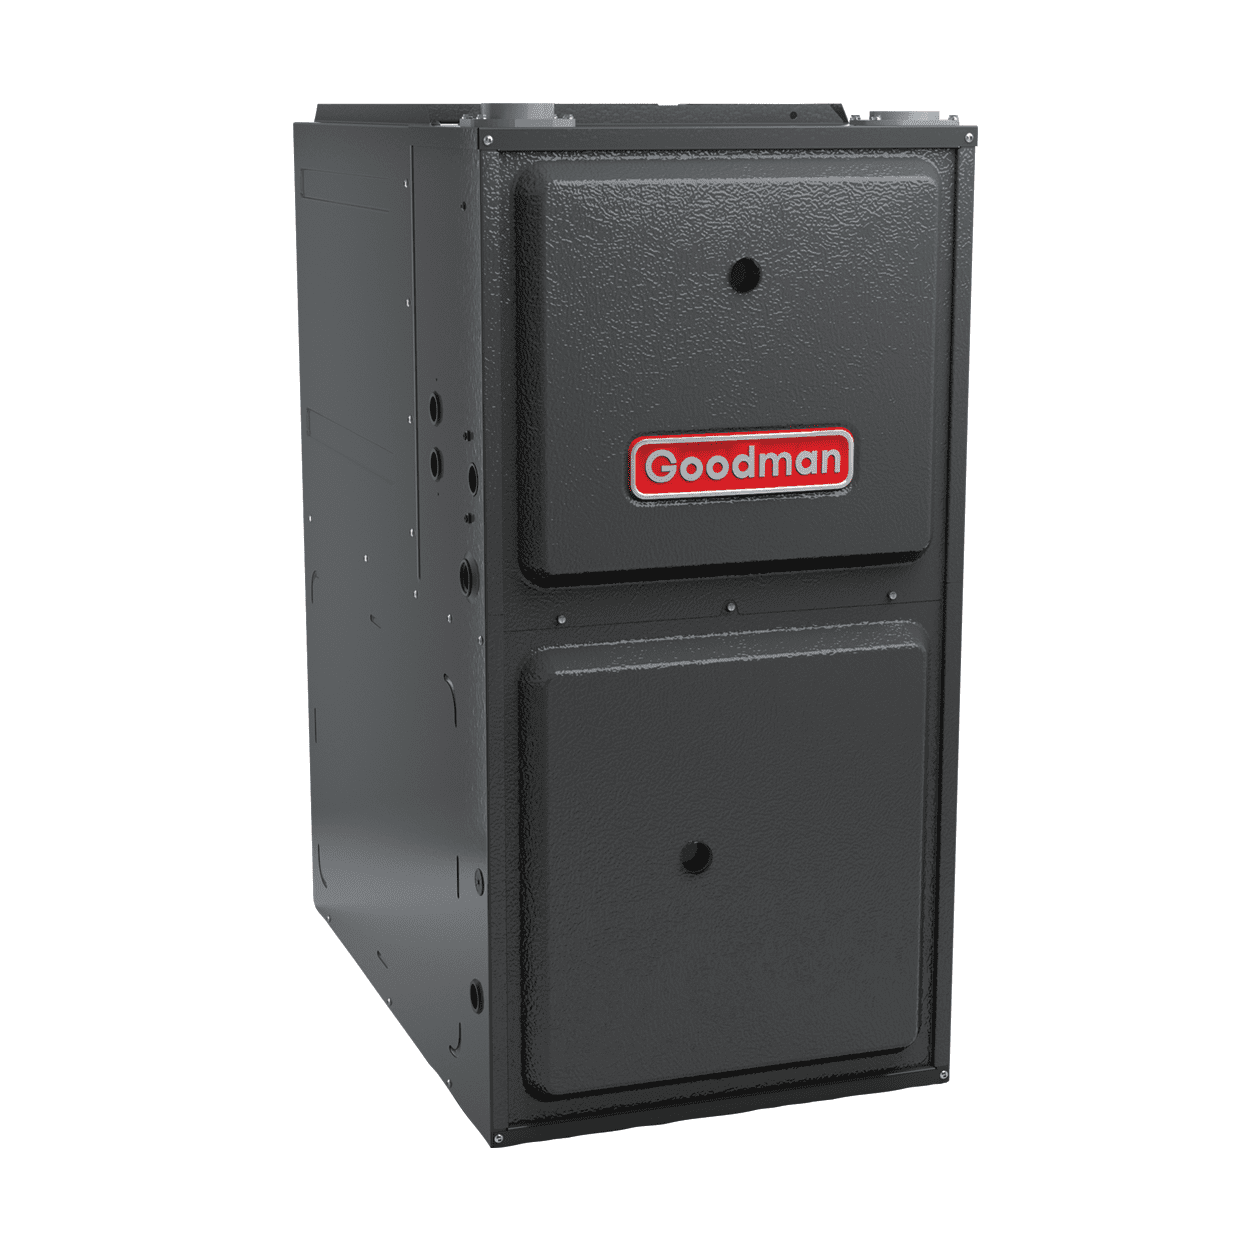 Goodman is a brand of furnace that we sell and offer for service for furnace repair